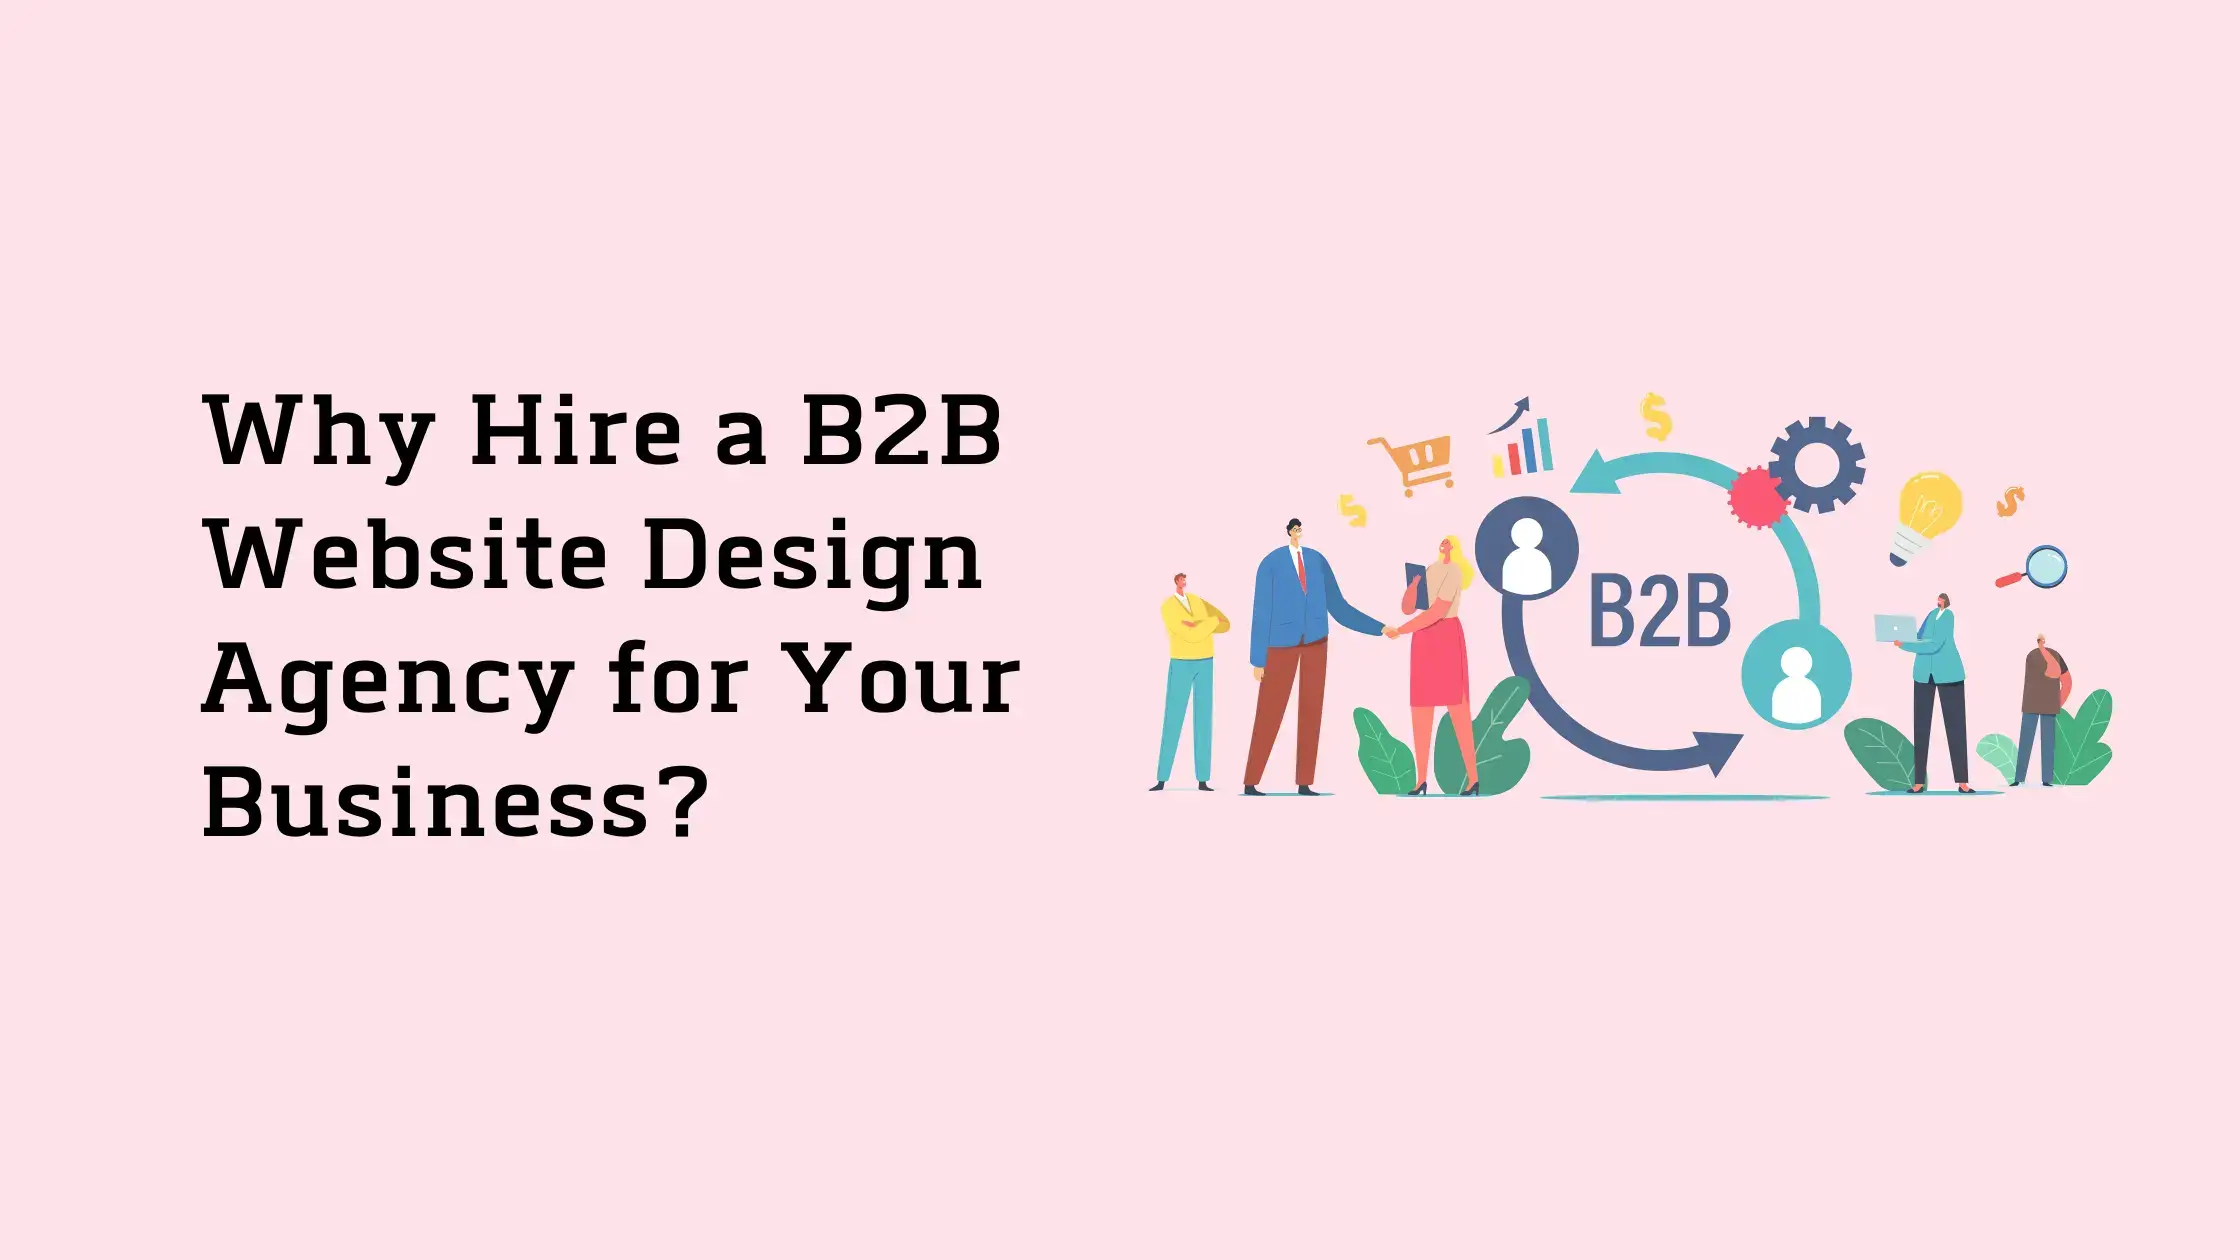 Why-Hire-a-B2B-Website-Design-Agency-for-Your-Business